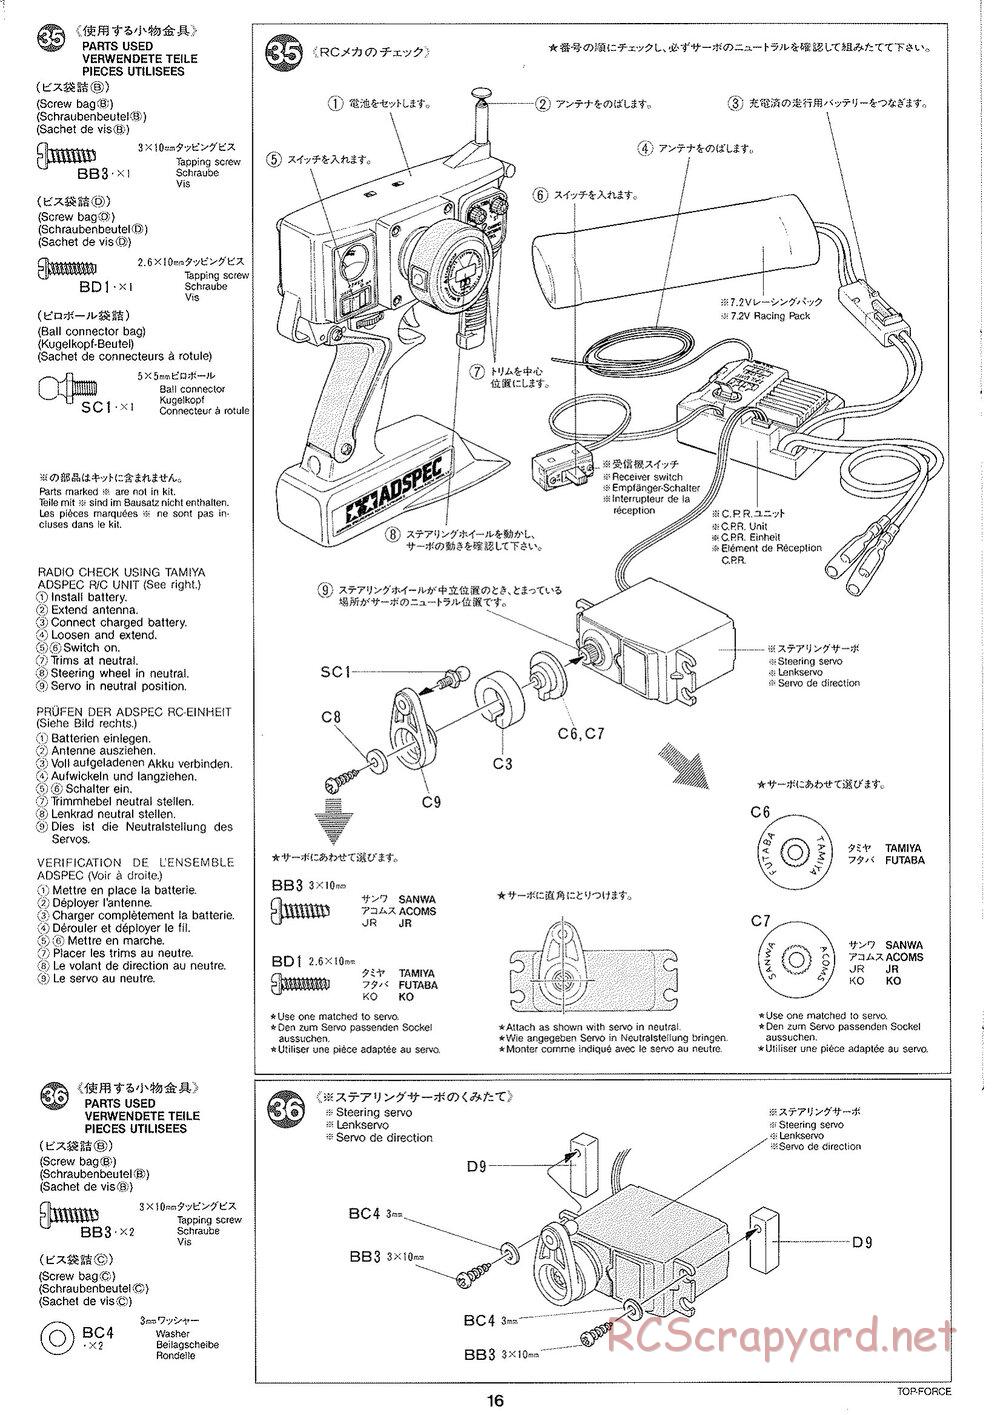 Tamiya - Top Force 2005 - DF-01 Chassis - Manual - Page 16